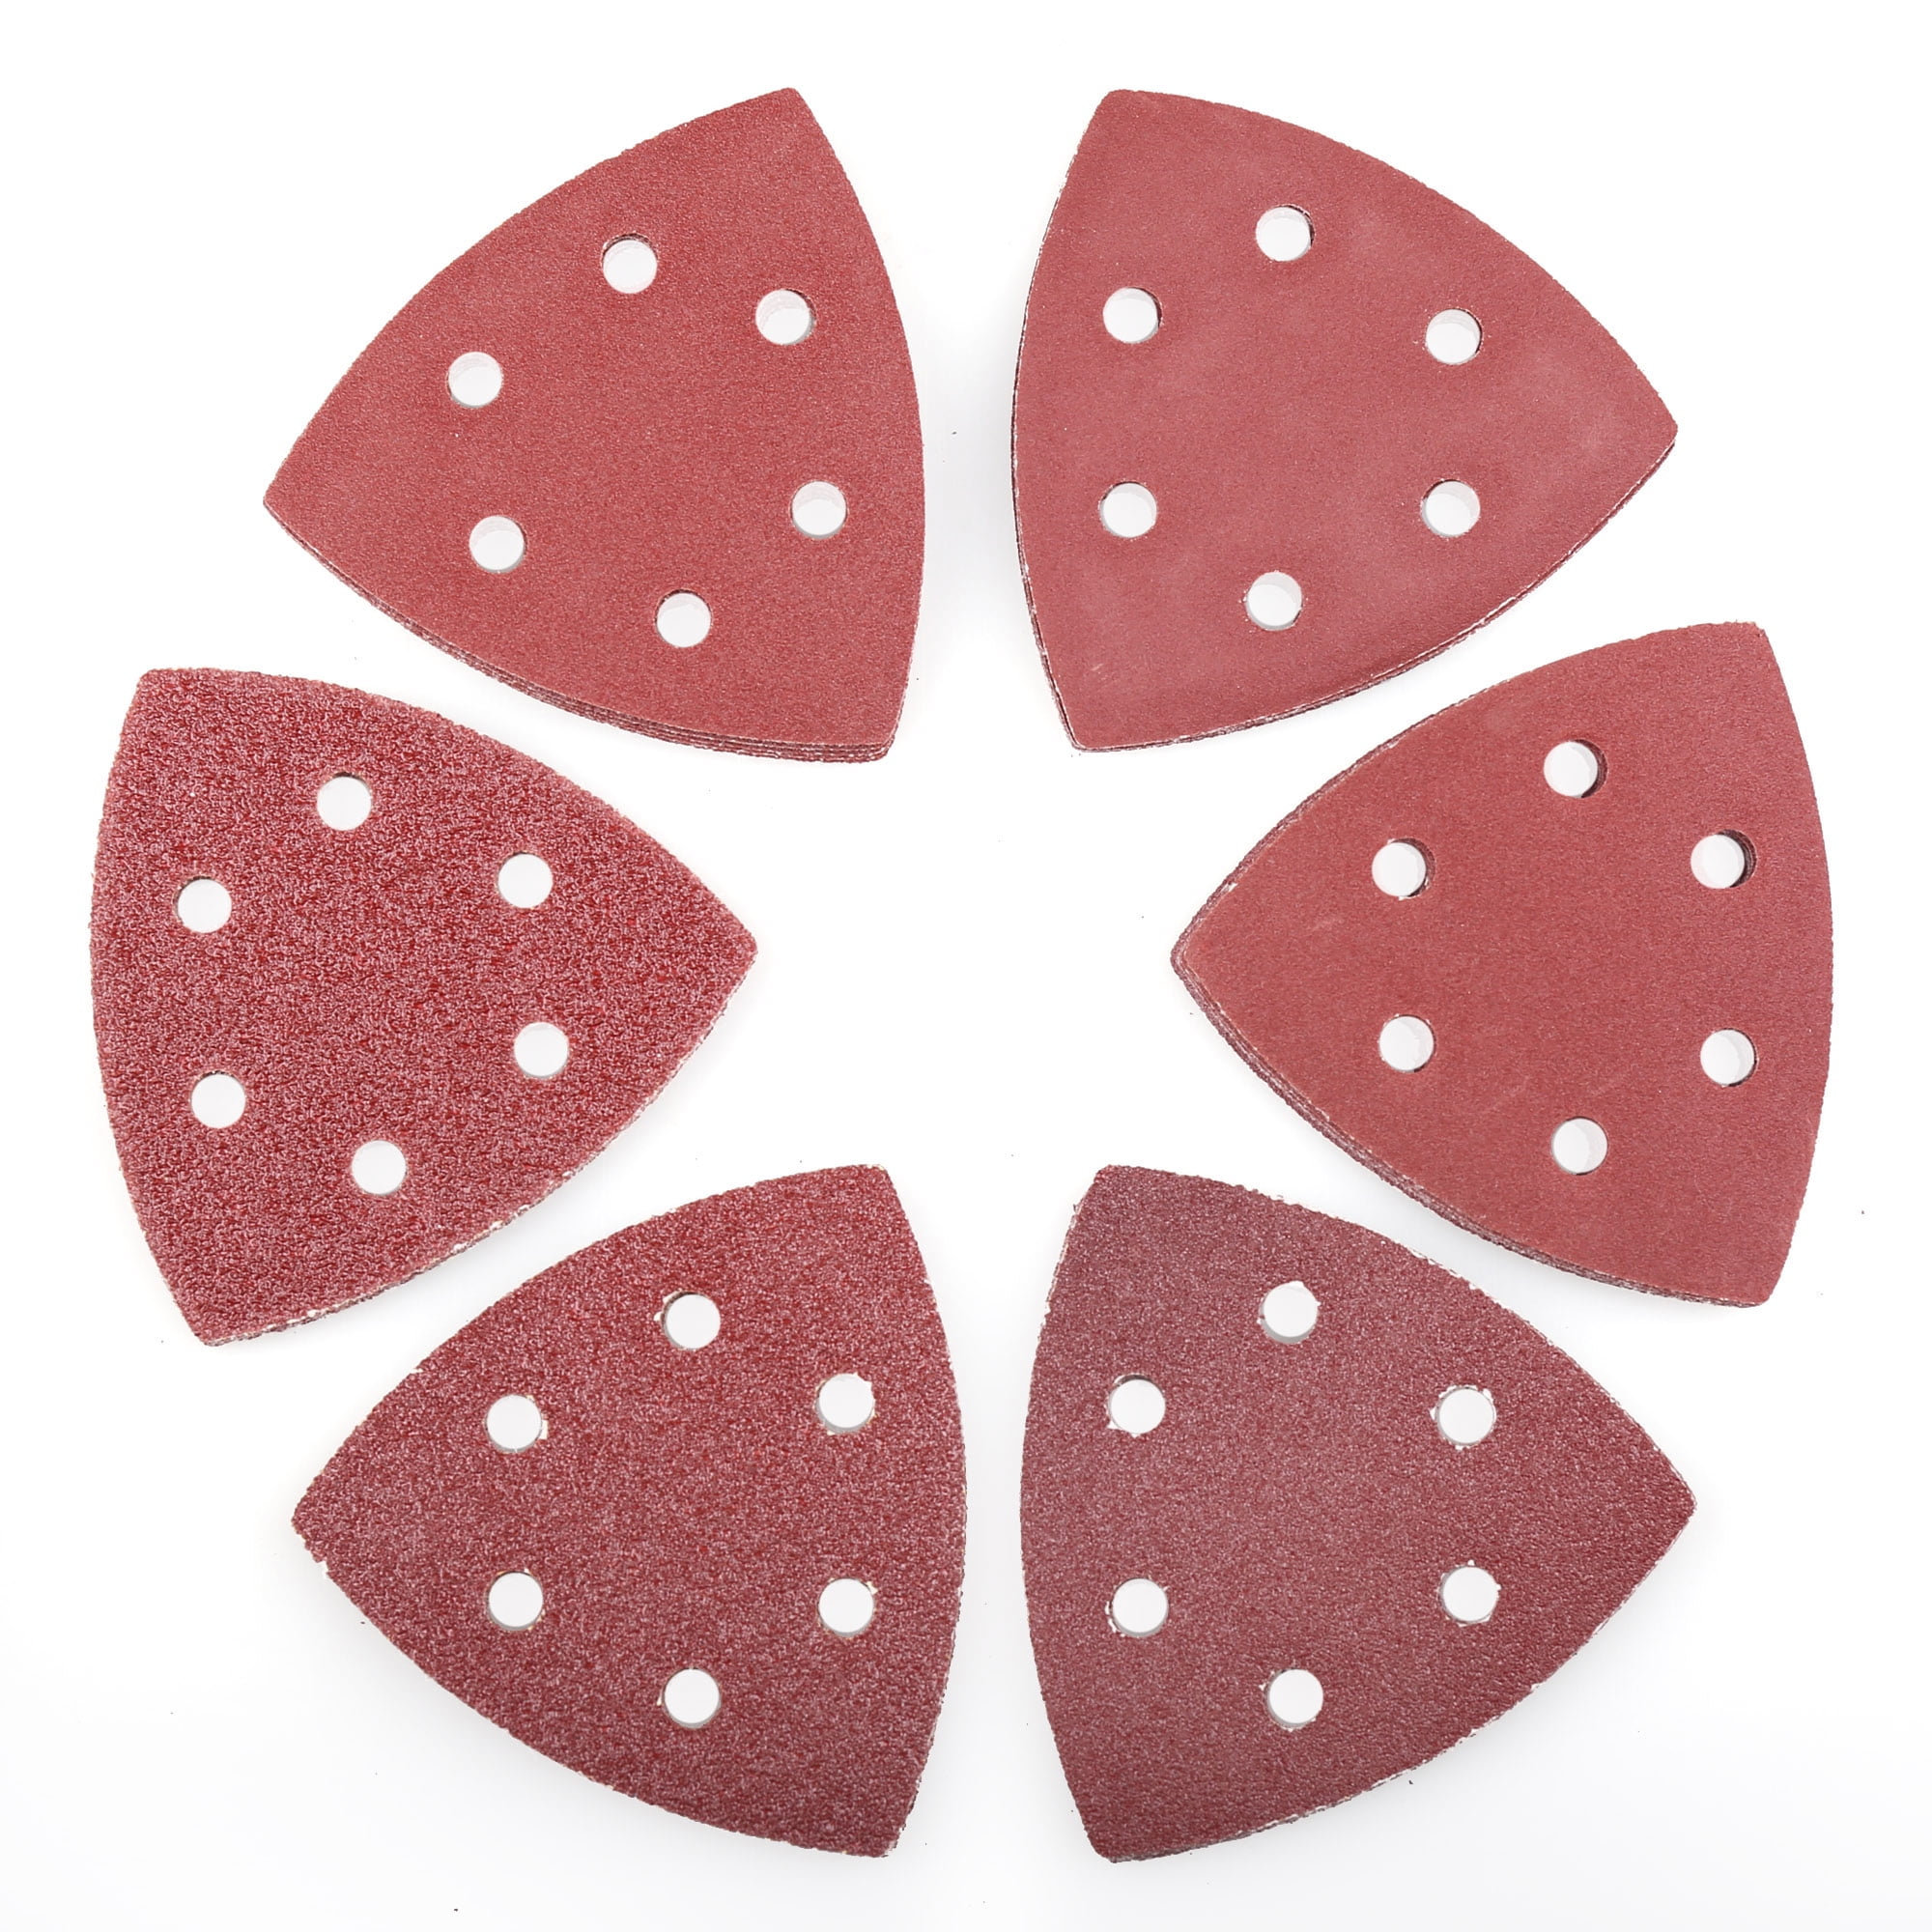 20x MIXED GRIT TRIANGULAR SANDING SHEETS 80mm Delta Mouse Sander Discs Pads Palm 